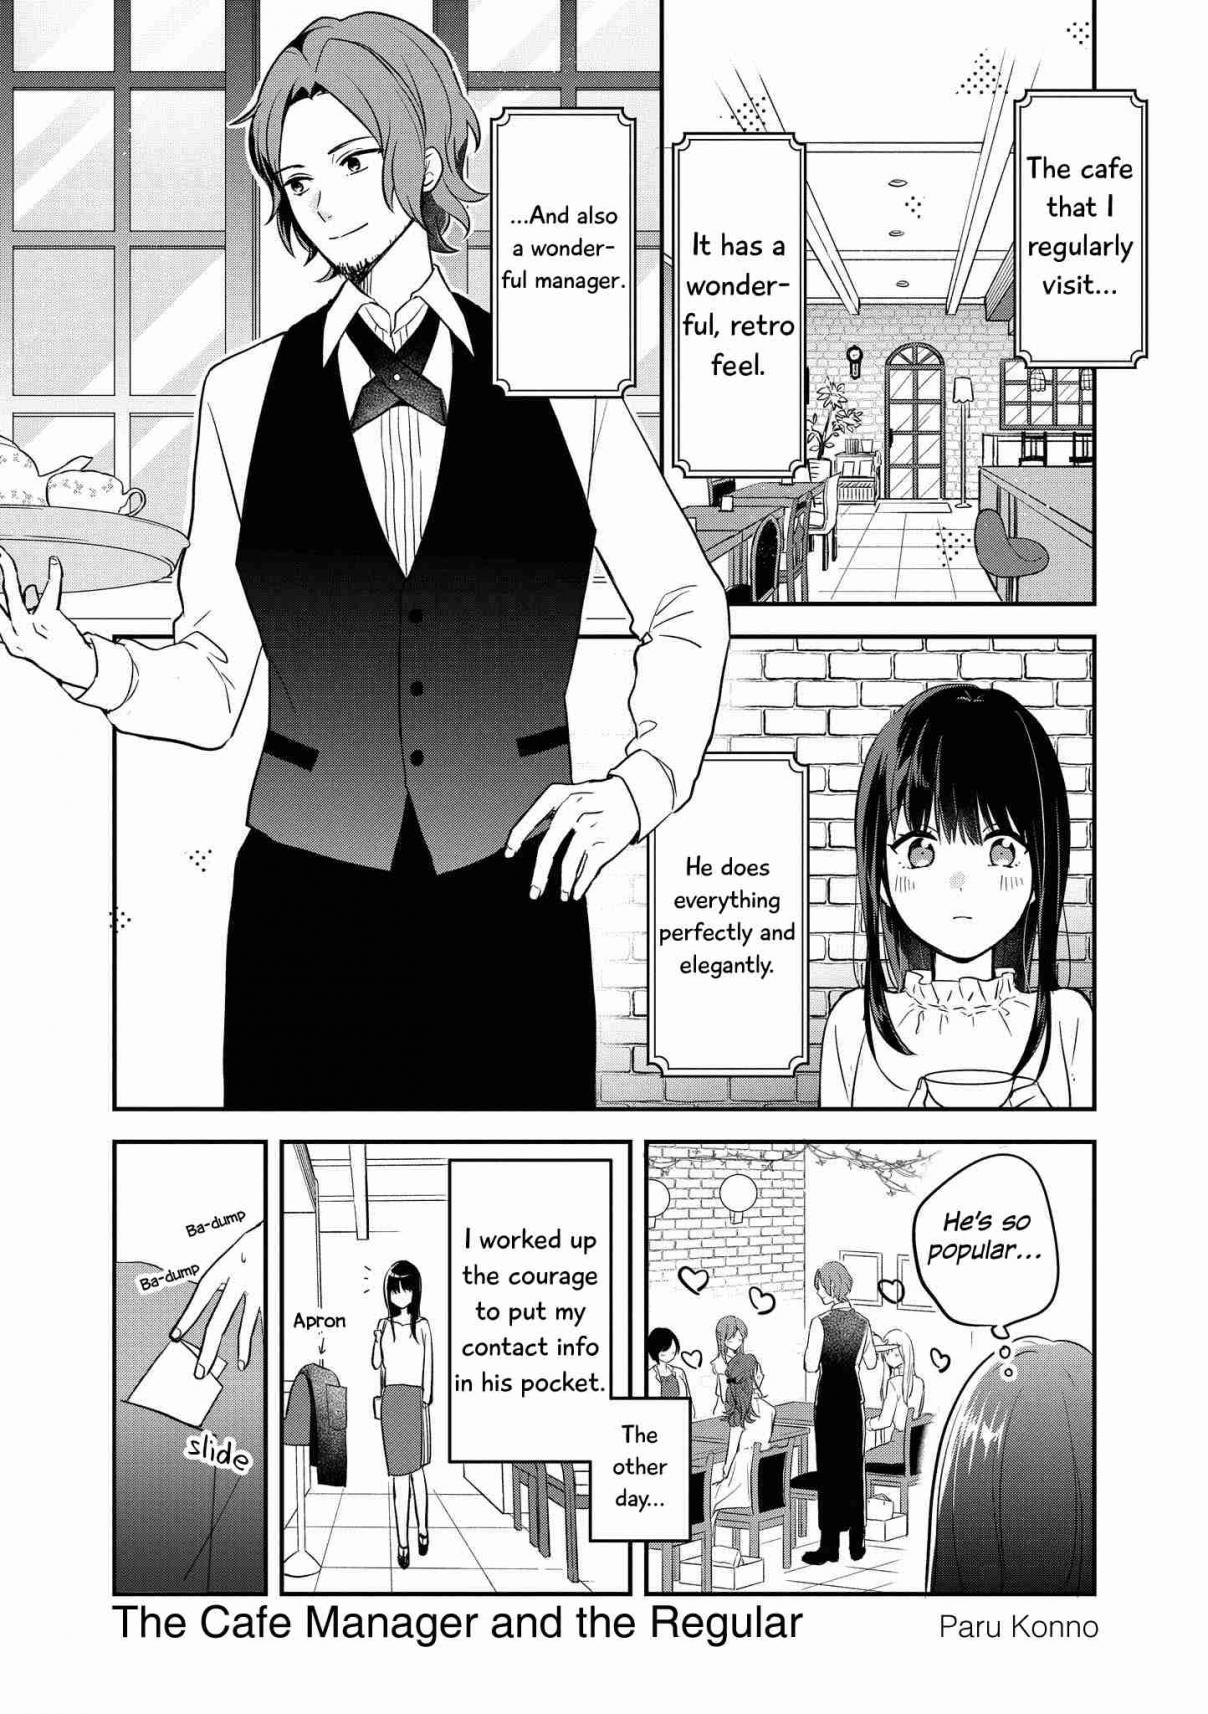 “It’s Too Precious and Hard to Read!!” 4P Short Stories Vol. 2 Ch. 41 The Cafe Manager and the Regular [Paru Konno]